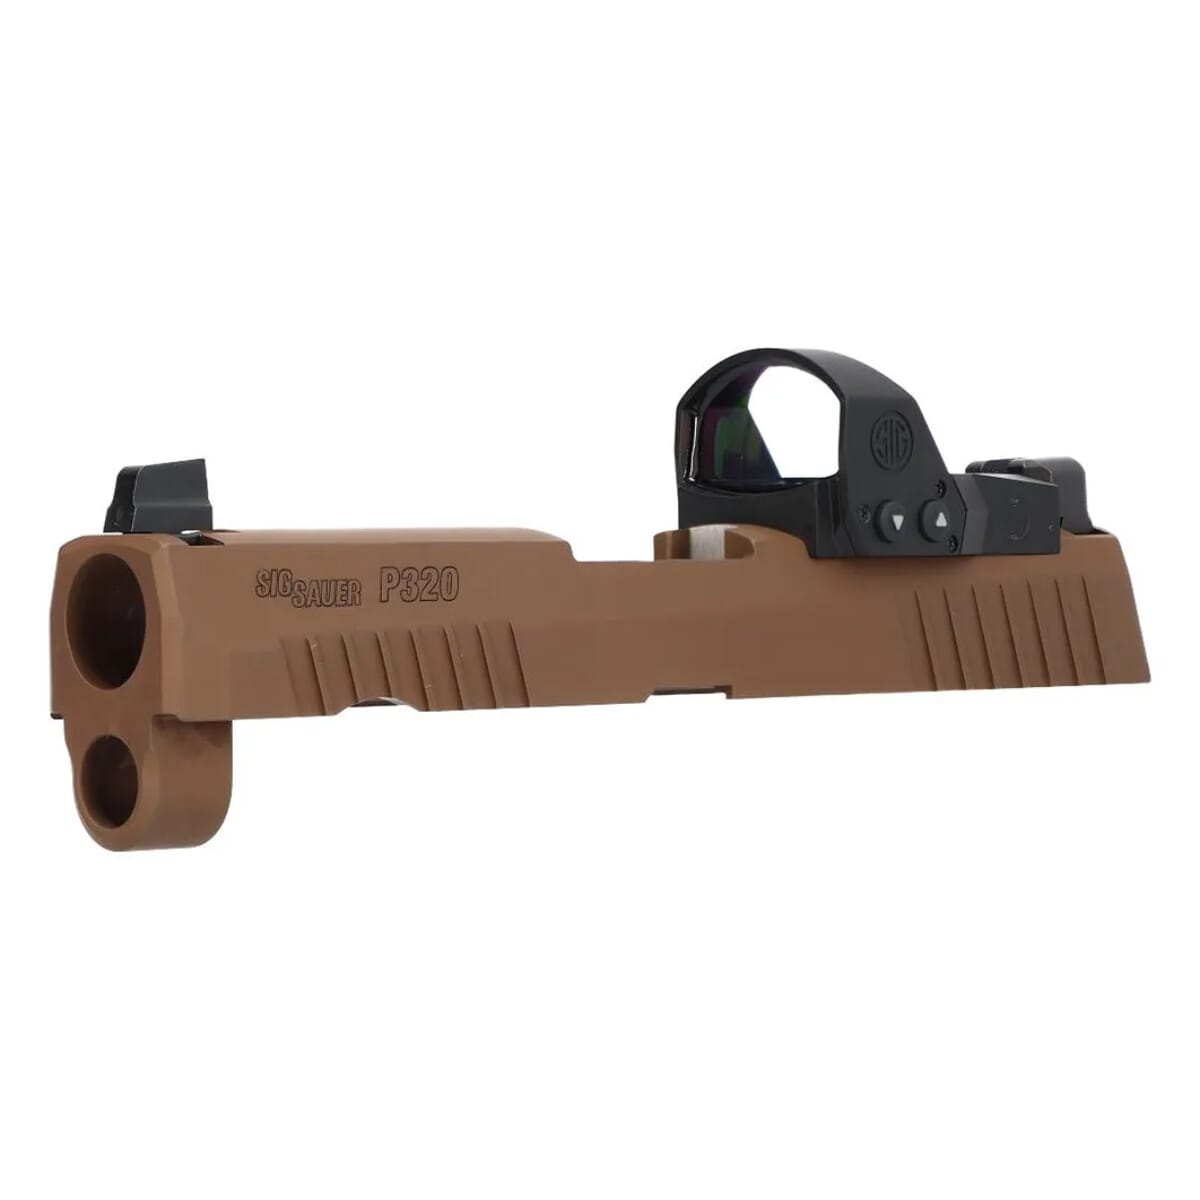 Sig Sauer P320 PRO 9mm 3.9" Bbl Coyote Brown Slide Assembly w/XRAY3 Suppressor Sights & ROMEO1PRO 8900279